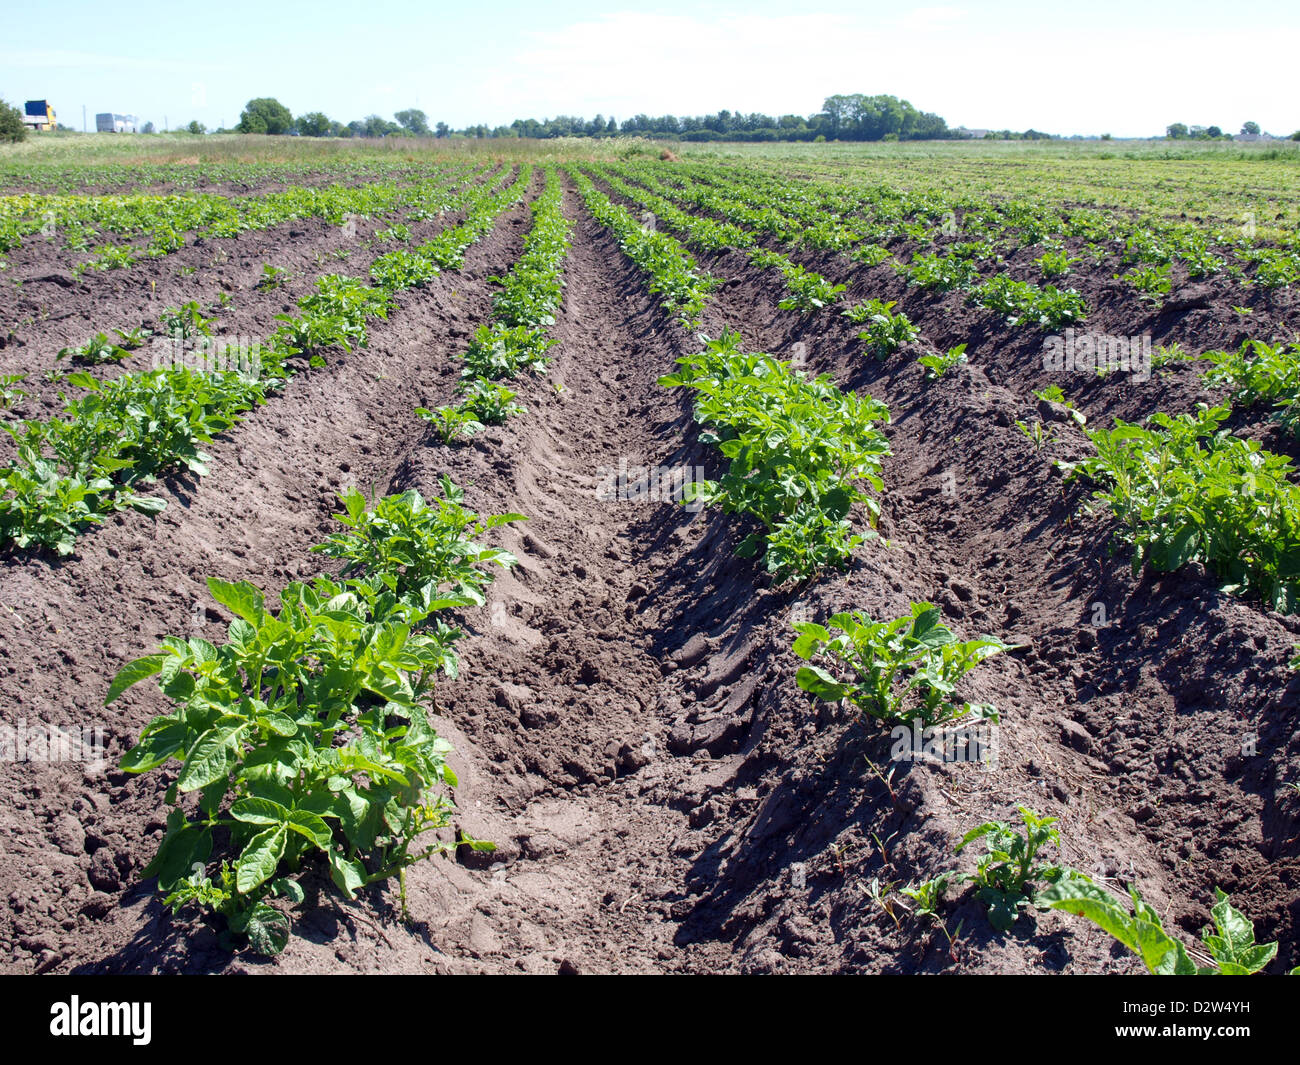 Country field with potato plants furrows Stock Photo